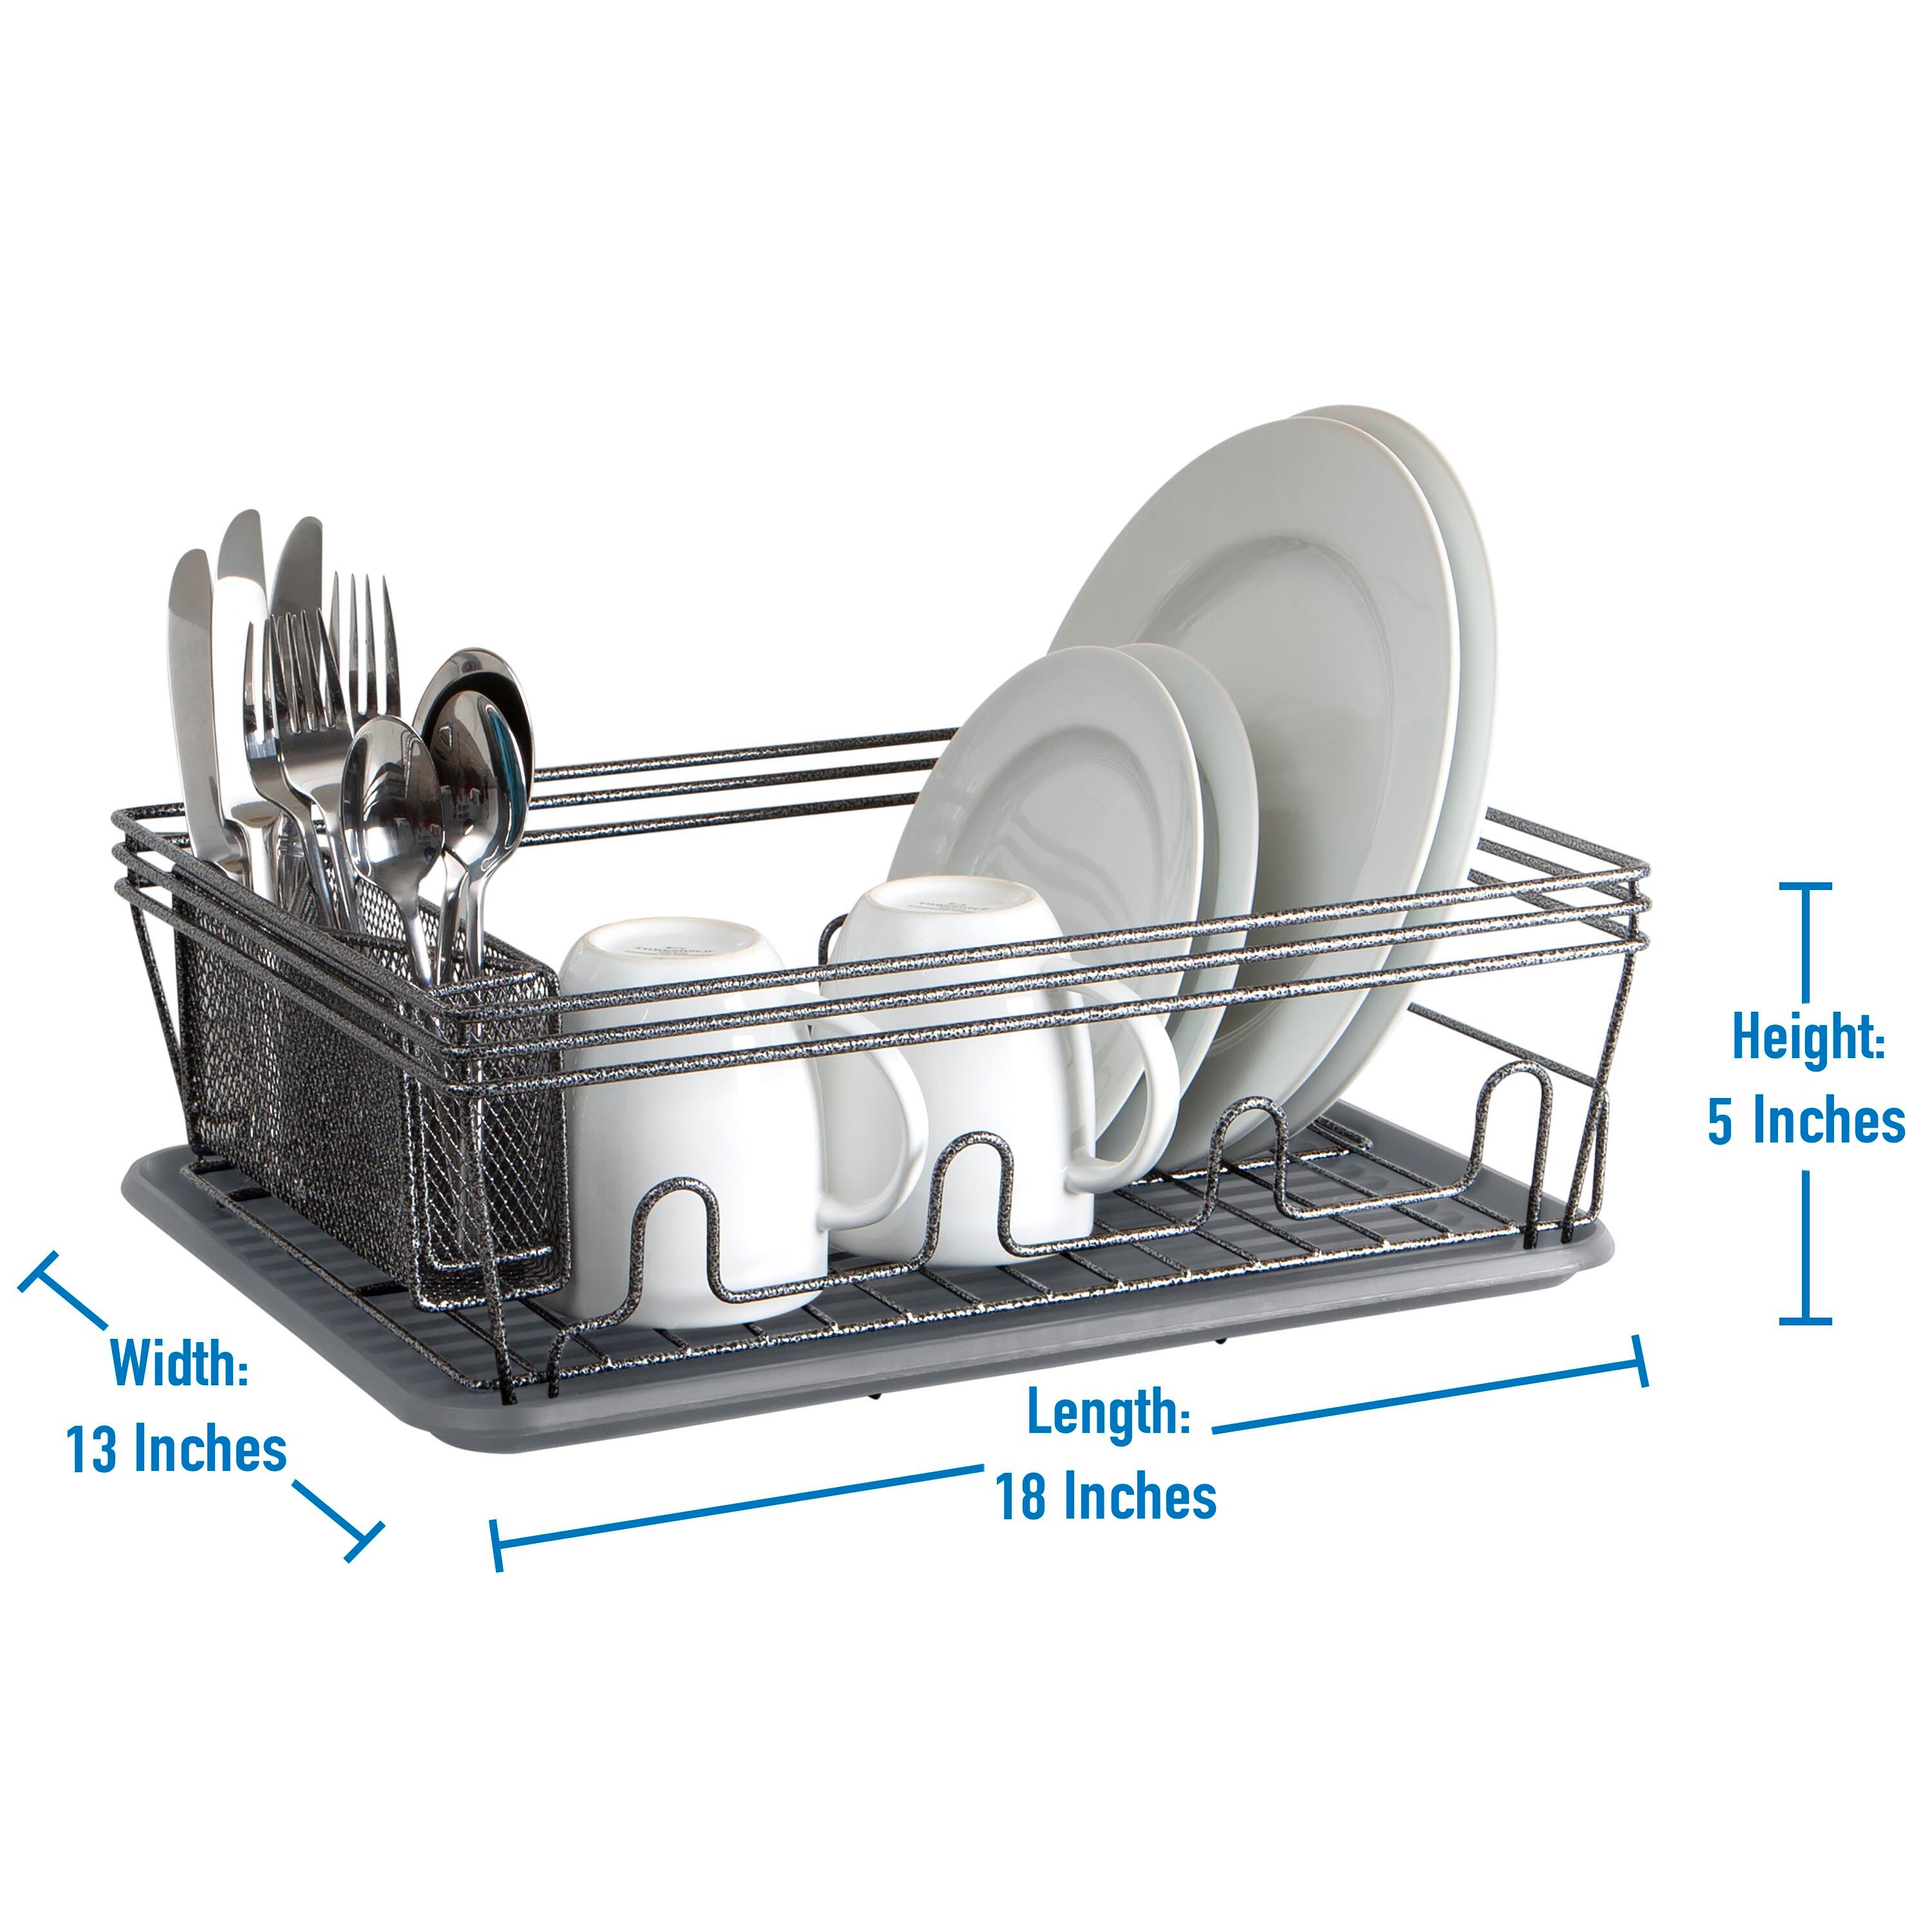 Outdoor Camping Gear Countertop Dish Rack Set with Sponge Drying